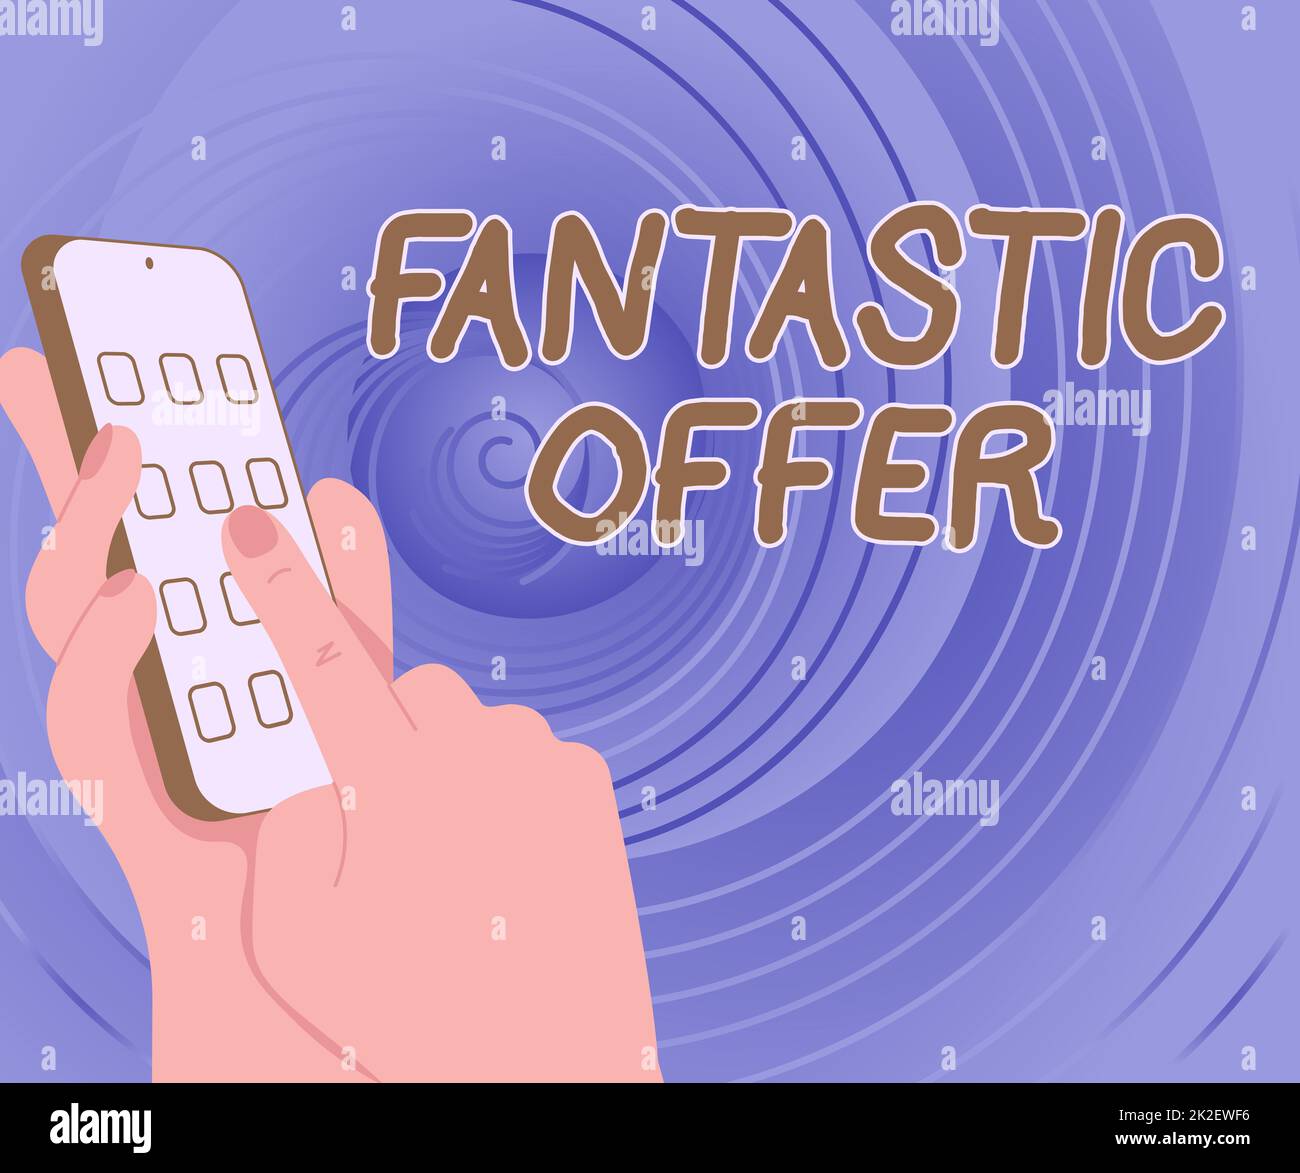 Inspiration showing sign Fantastic Offer. Business approach the seller accepts offers and is willing to negotiate Hands Holding Technological Device Pressing Application Button. Stock Photo